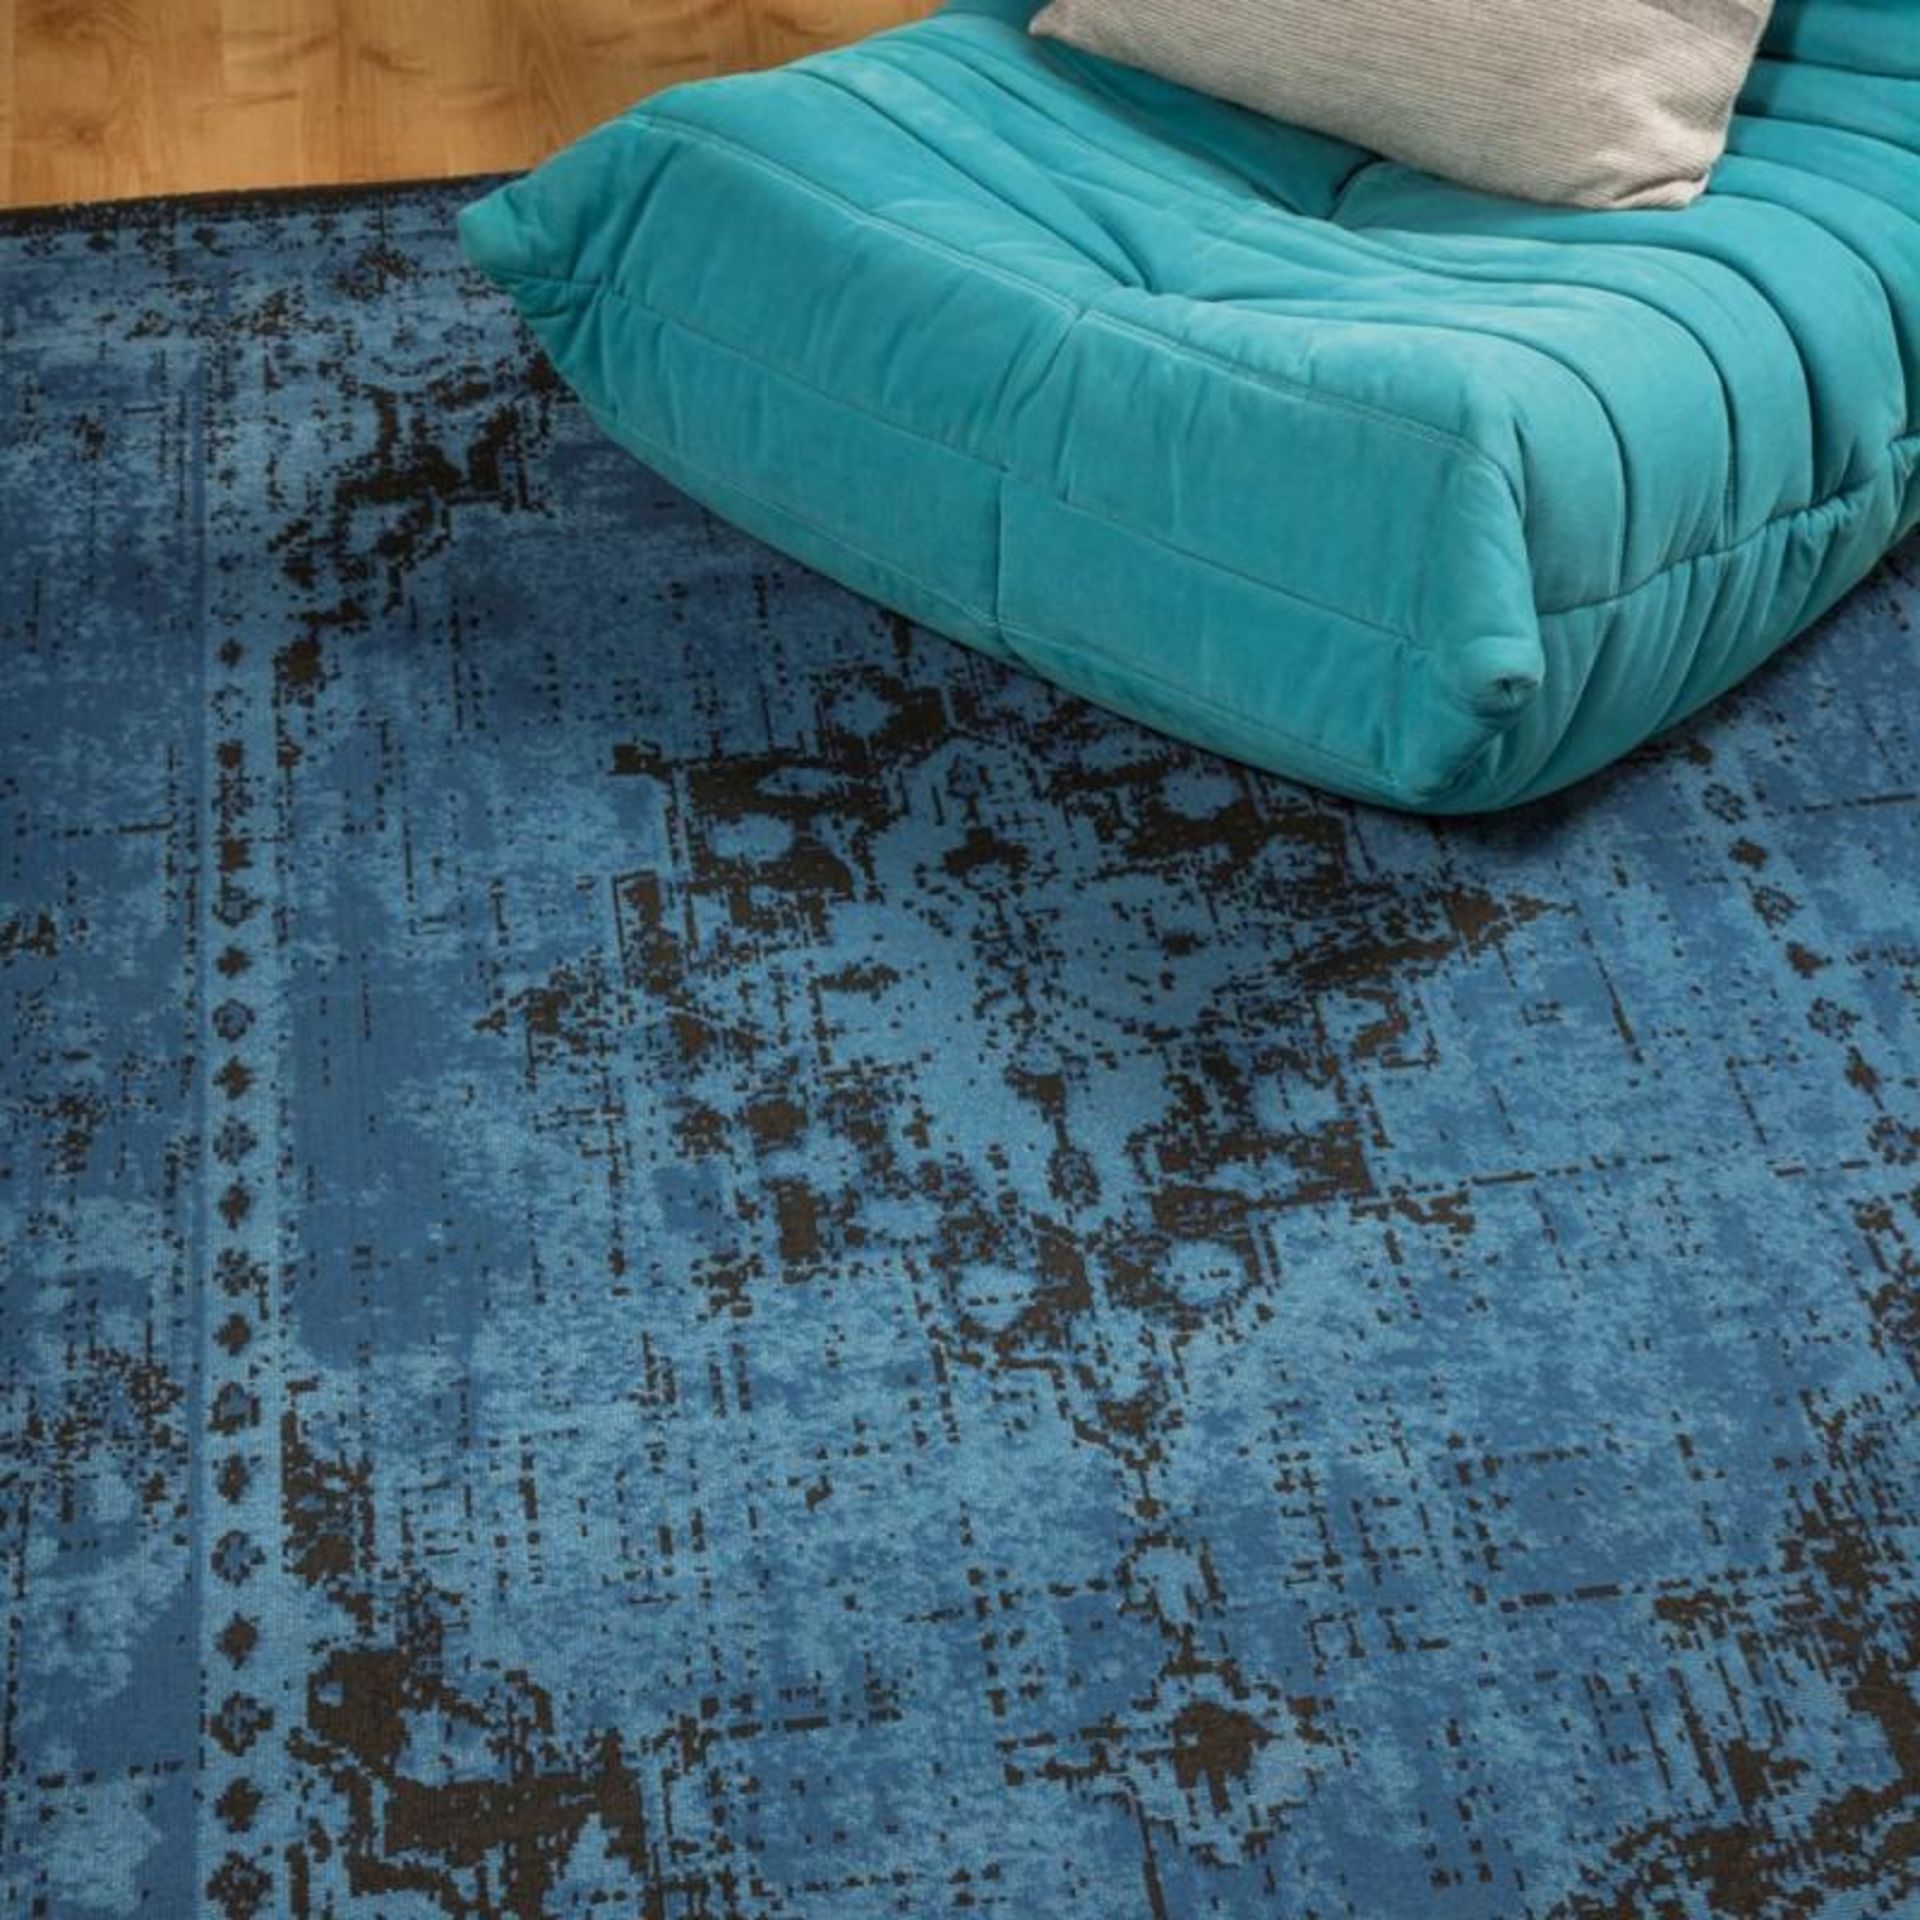 1 x Vintage Style Persian Inspired 'Revive' Rug In Blue - Ref: LF311 - Dimensions: 120 x 170cm - New - Image 4 of 5